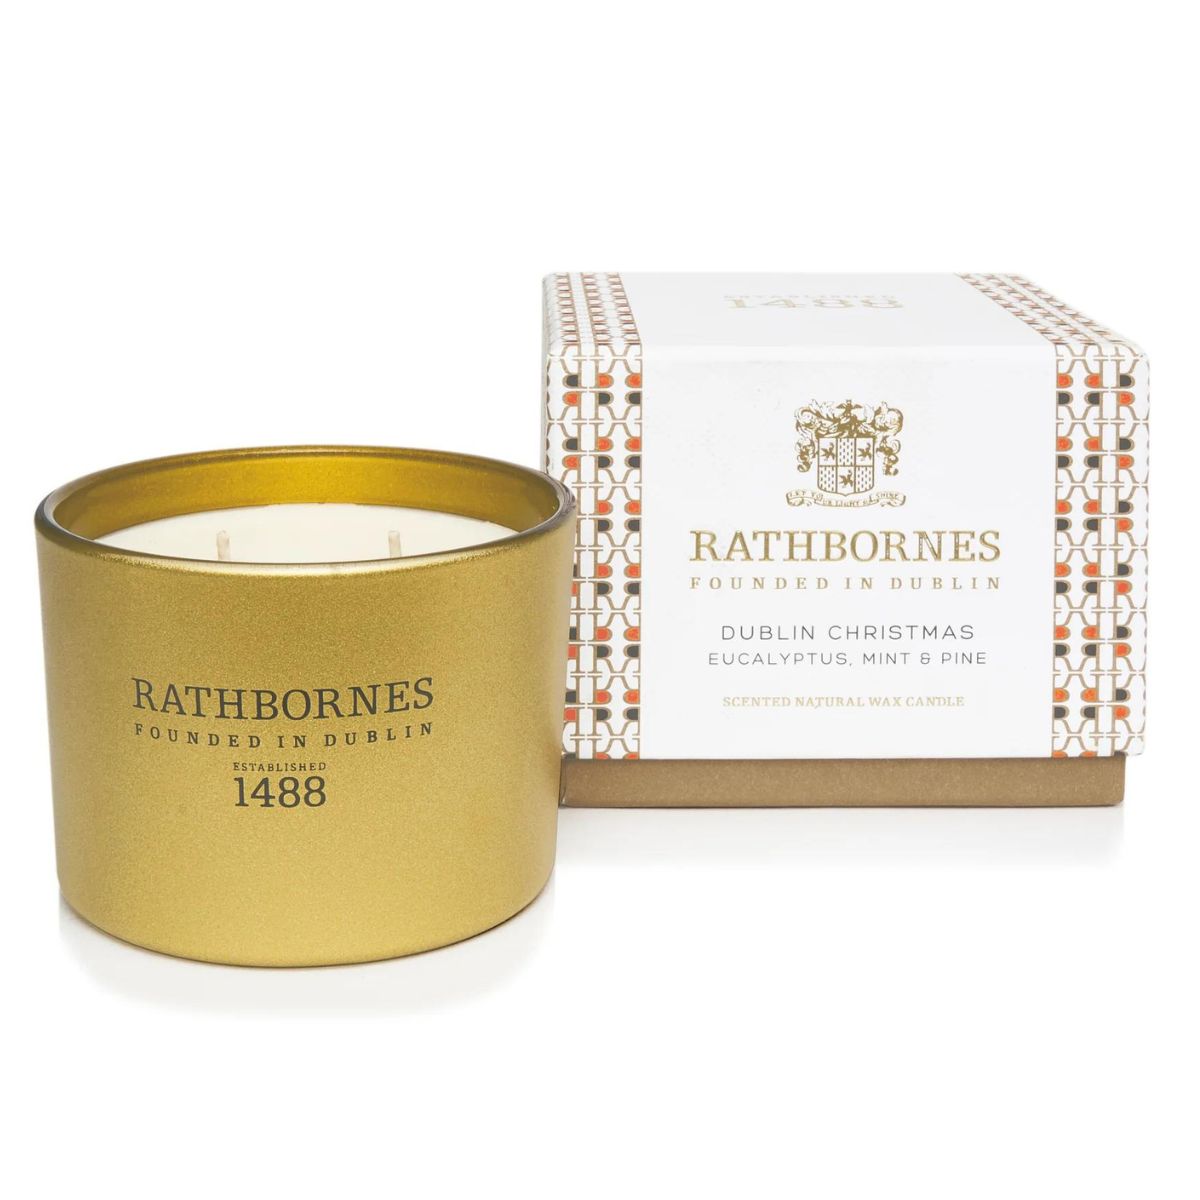 Rathbornes Dublin Christmas (Gold) 2 Wick Classic Candle